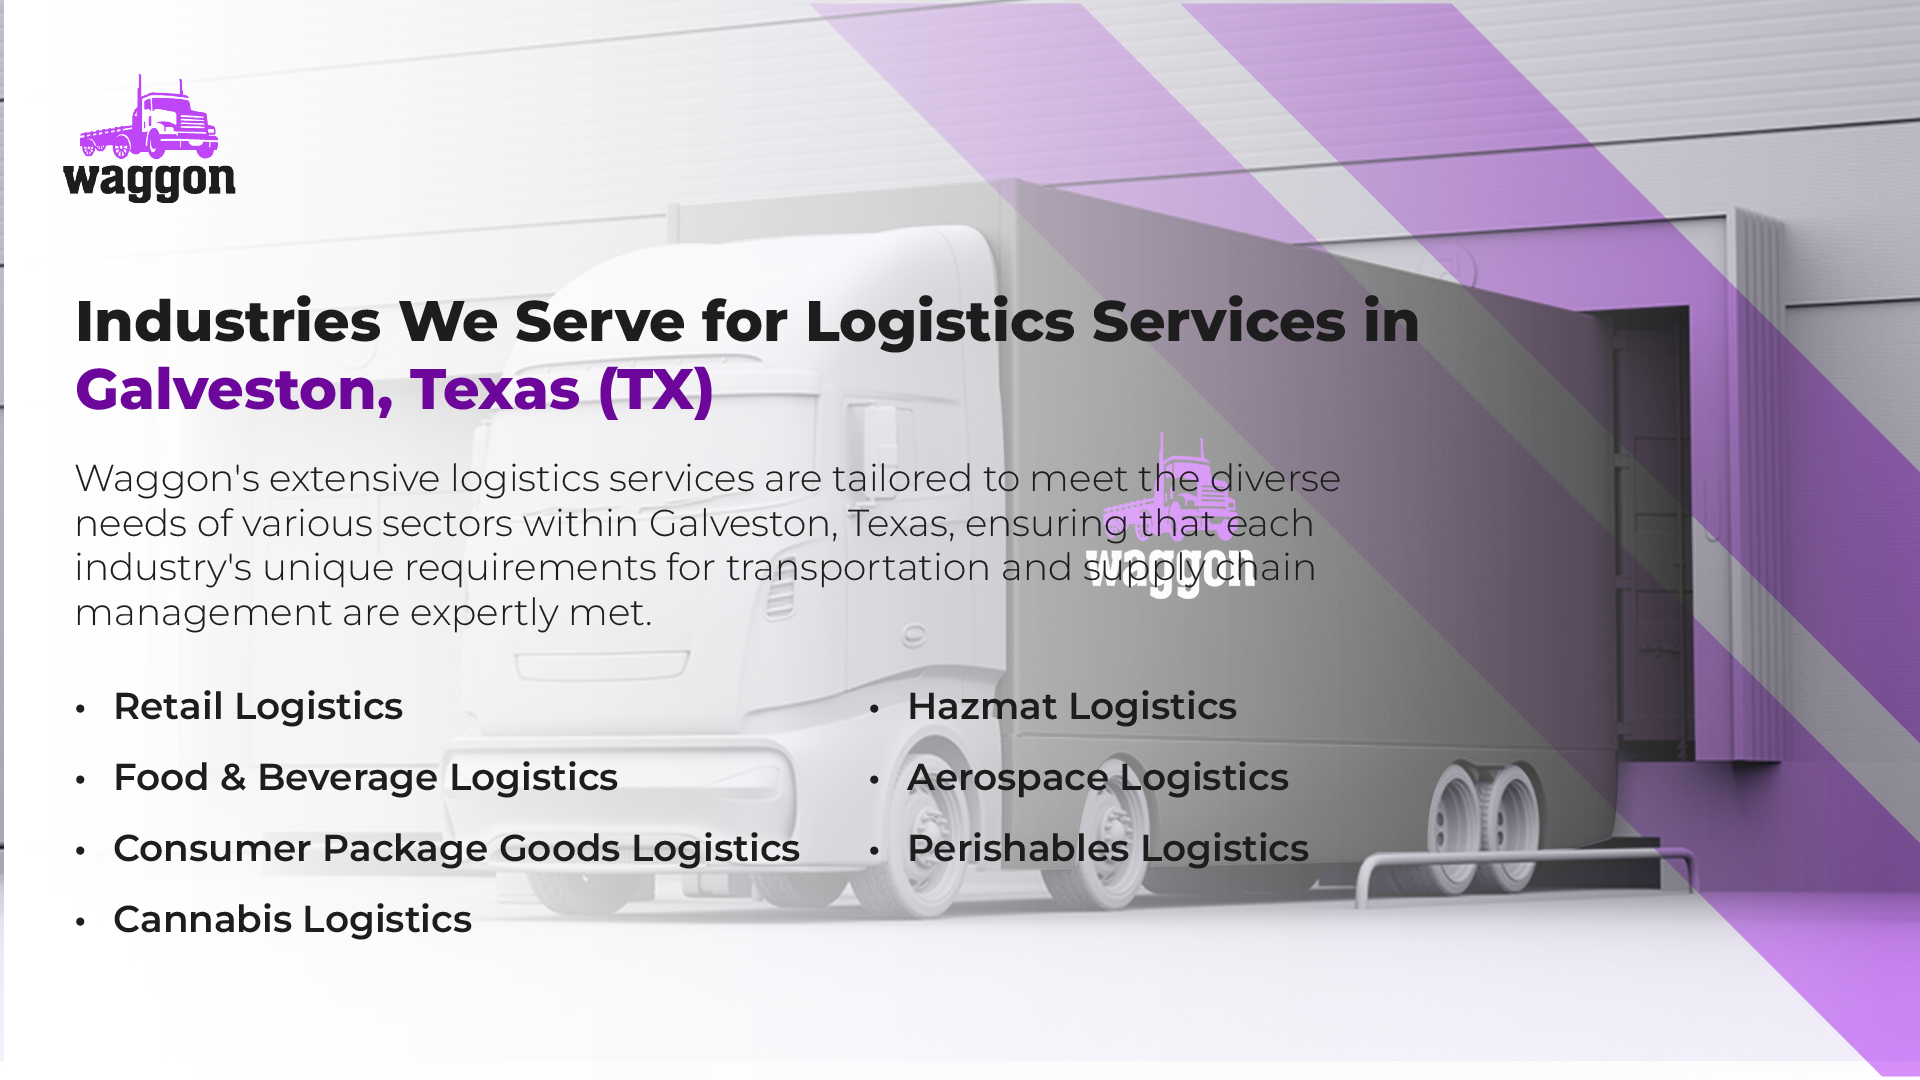 Industries We Serve for Logistics Services in Galveston, Texas (TX)